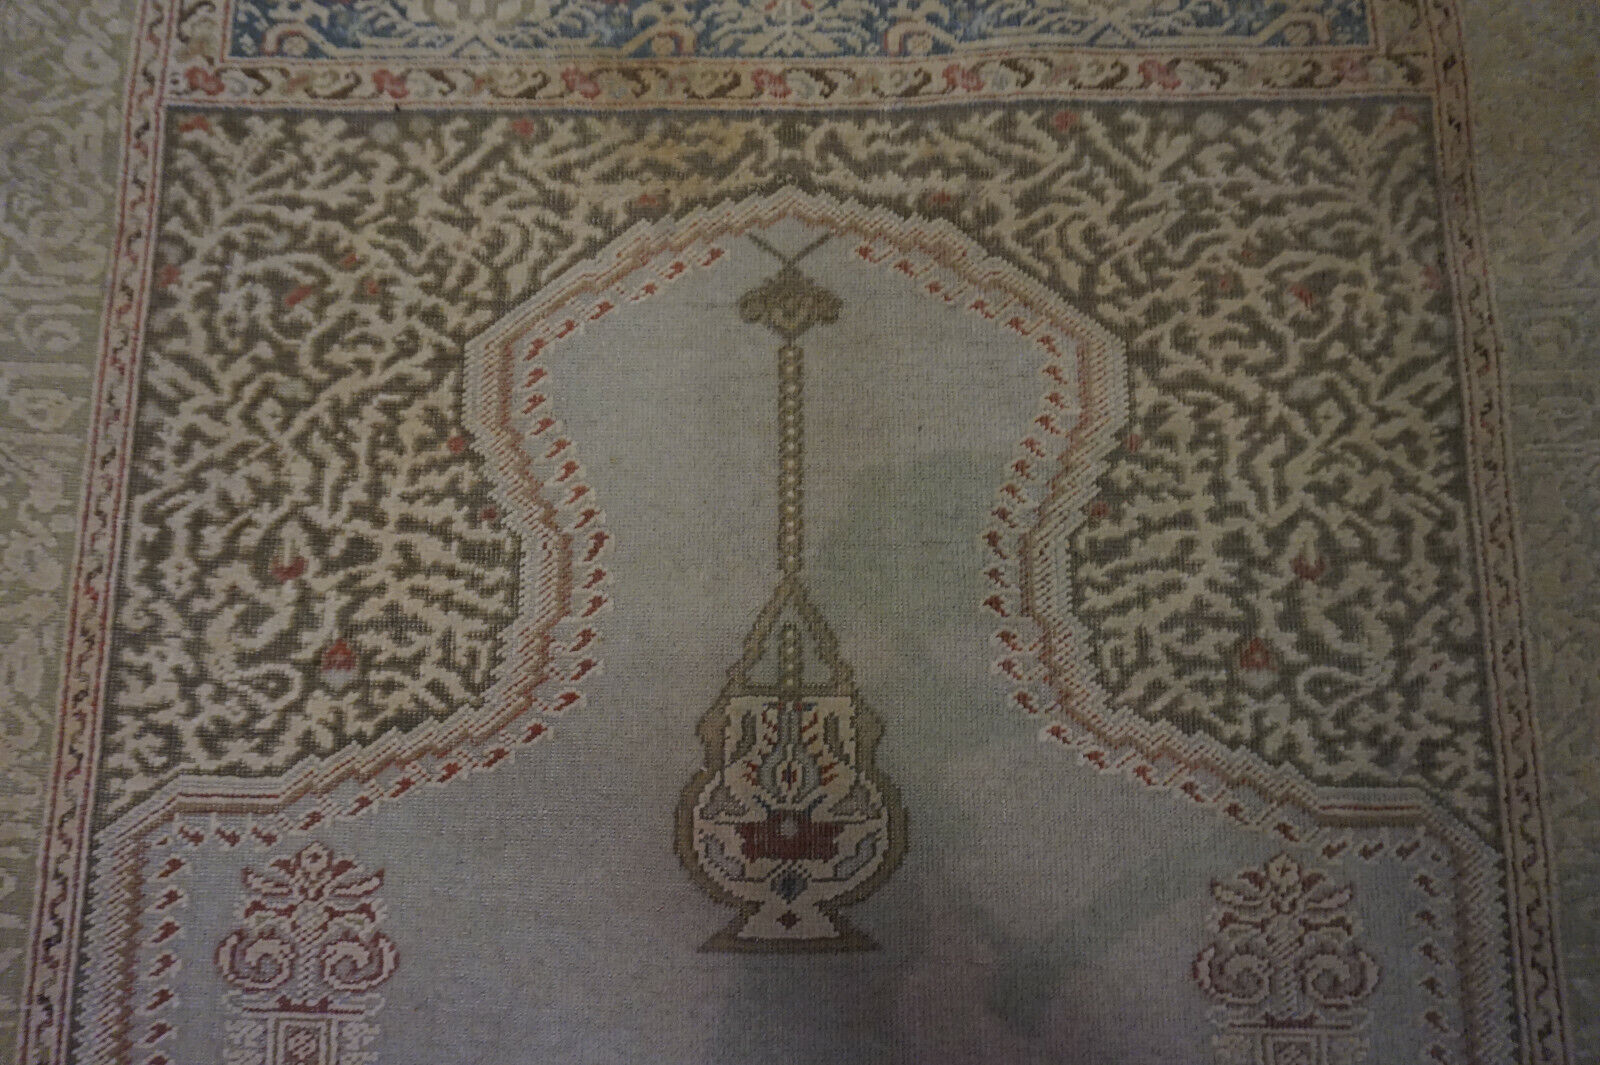 Close-up of the muted earthy tones and faded reds on the rug